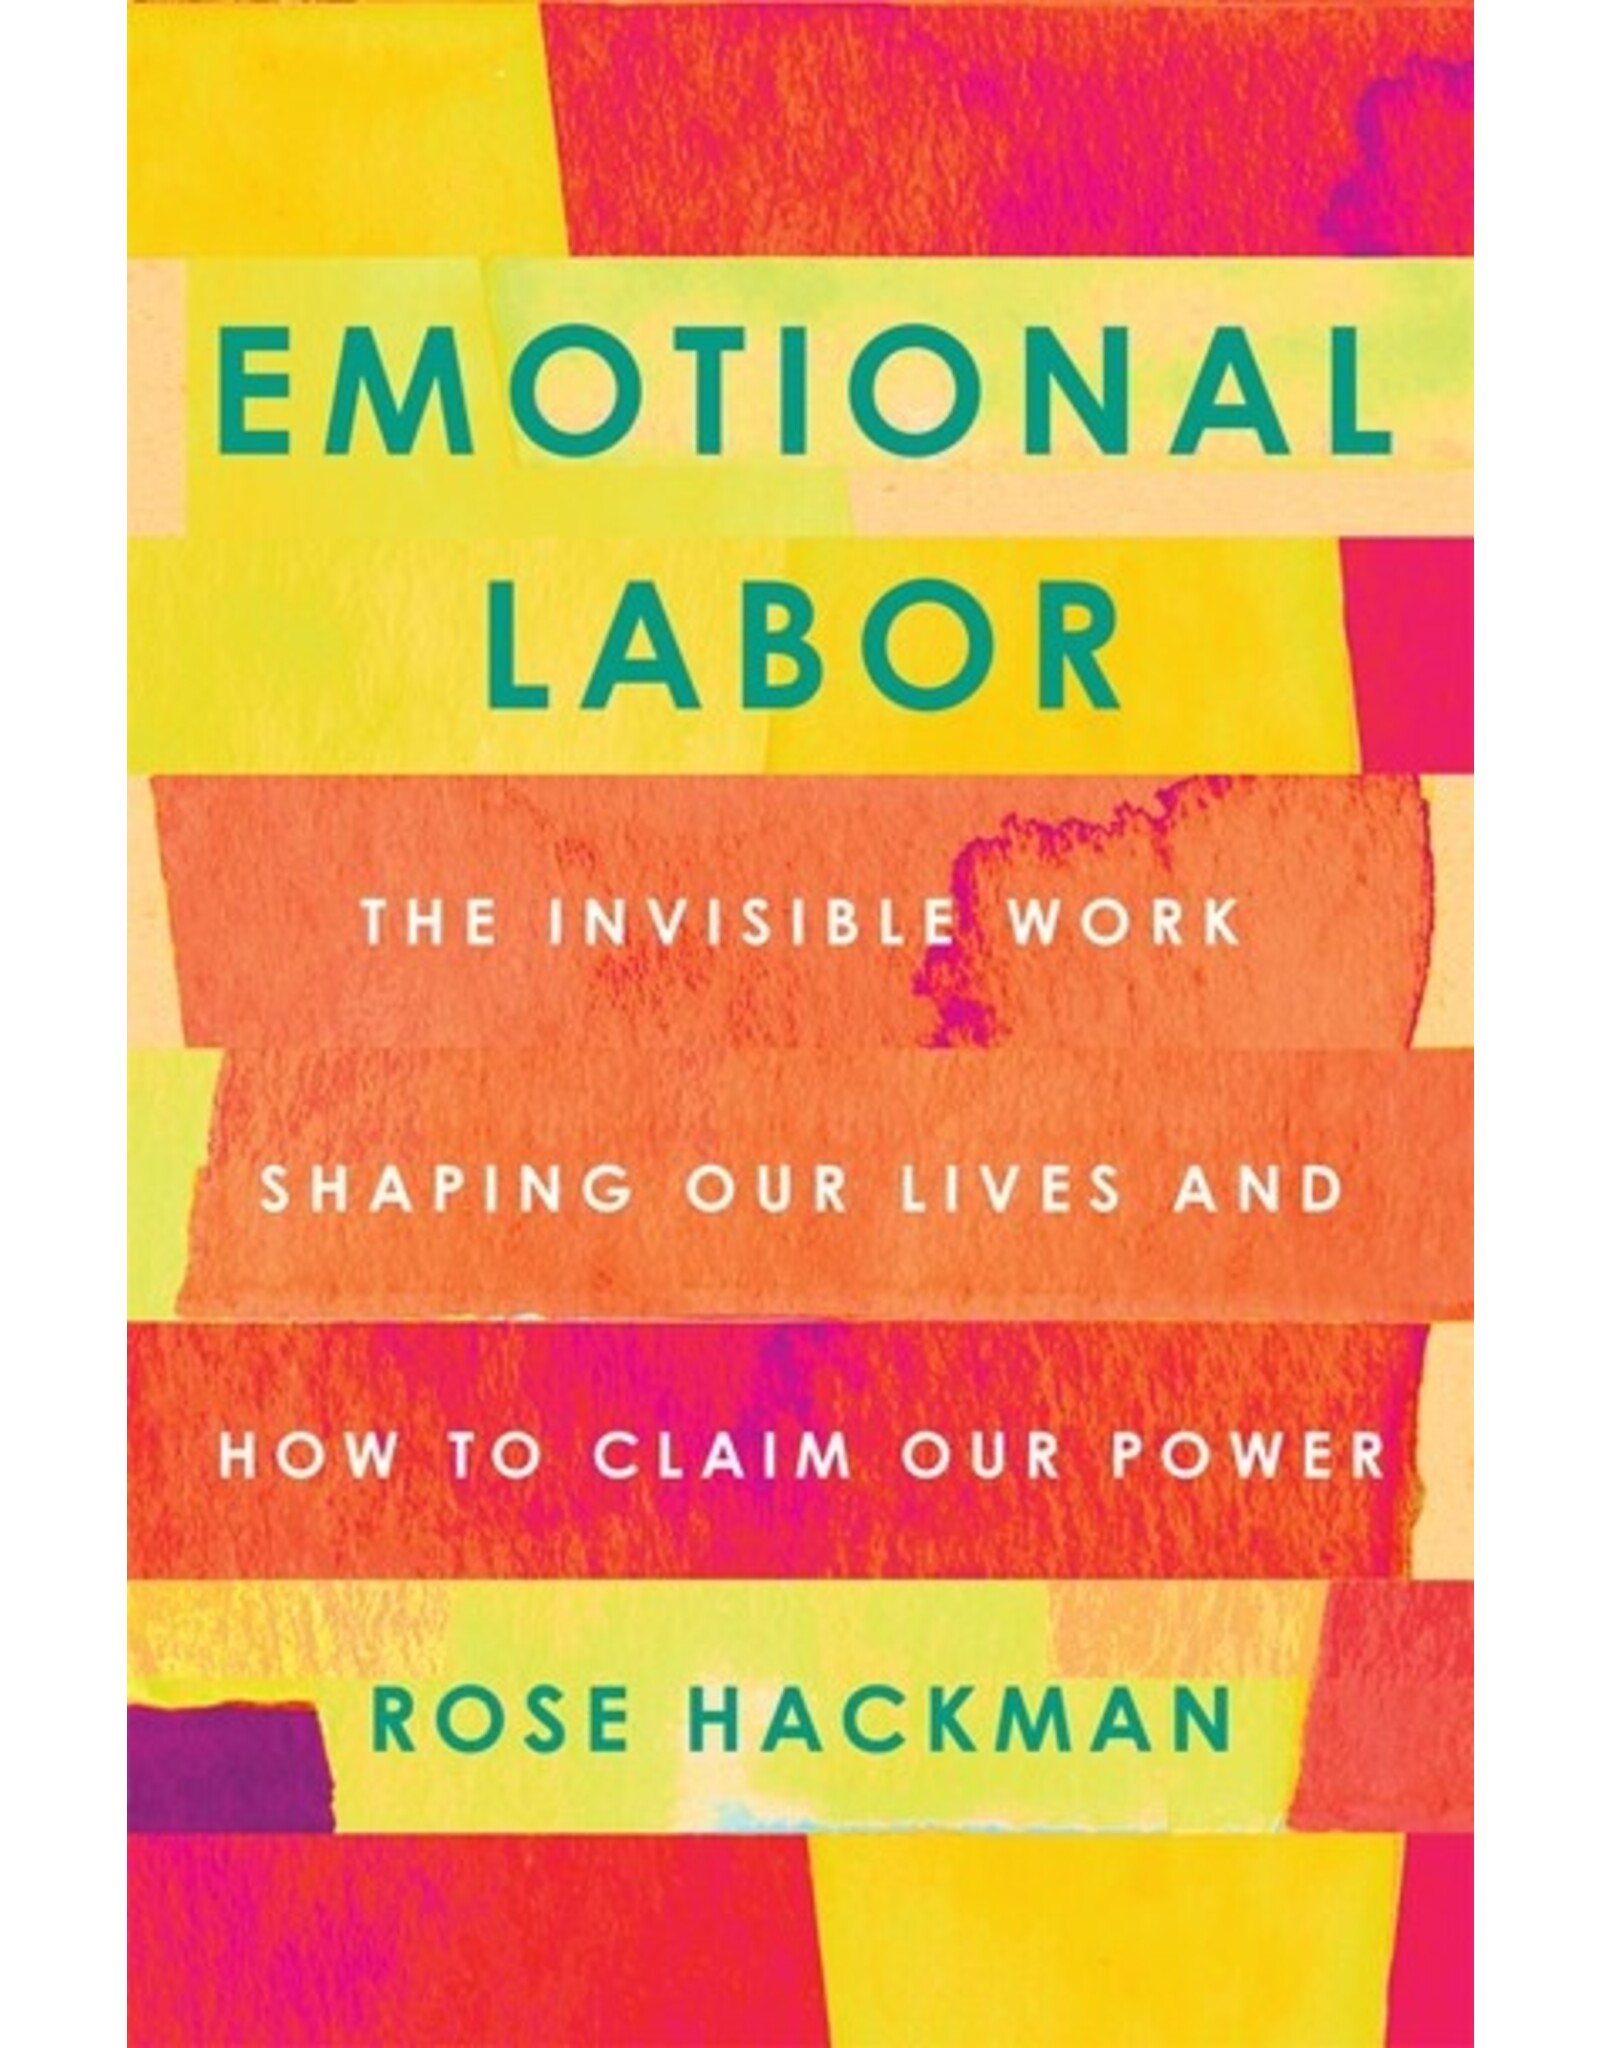 Emotional Labor : The Invisible Work Shaping Our Lives and How to Claim our Power by Rose Hackman